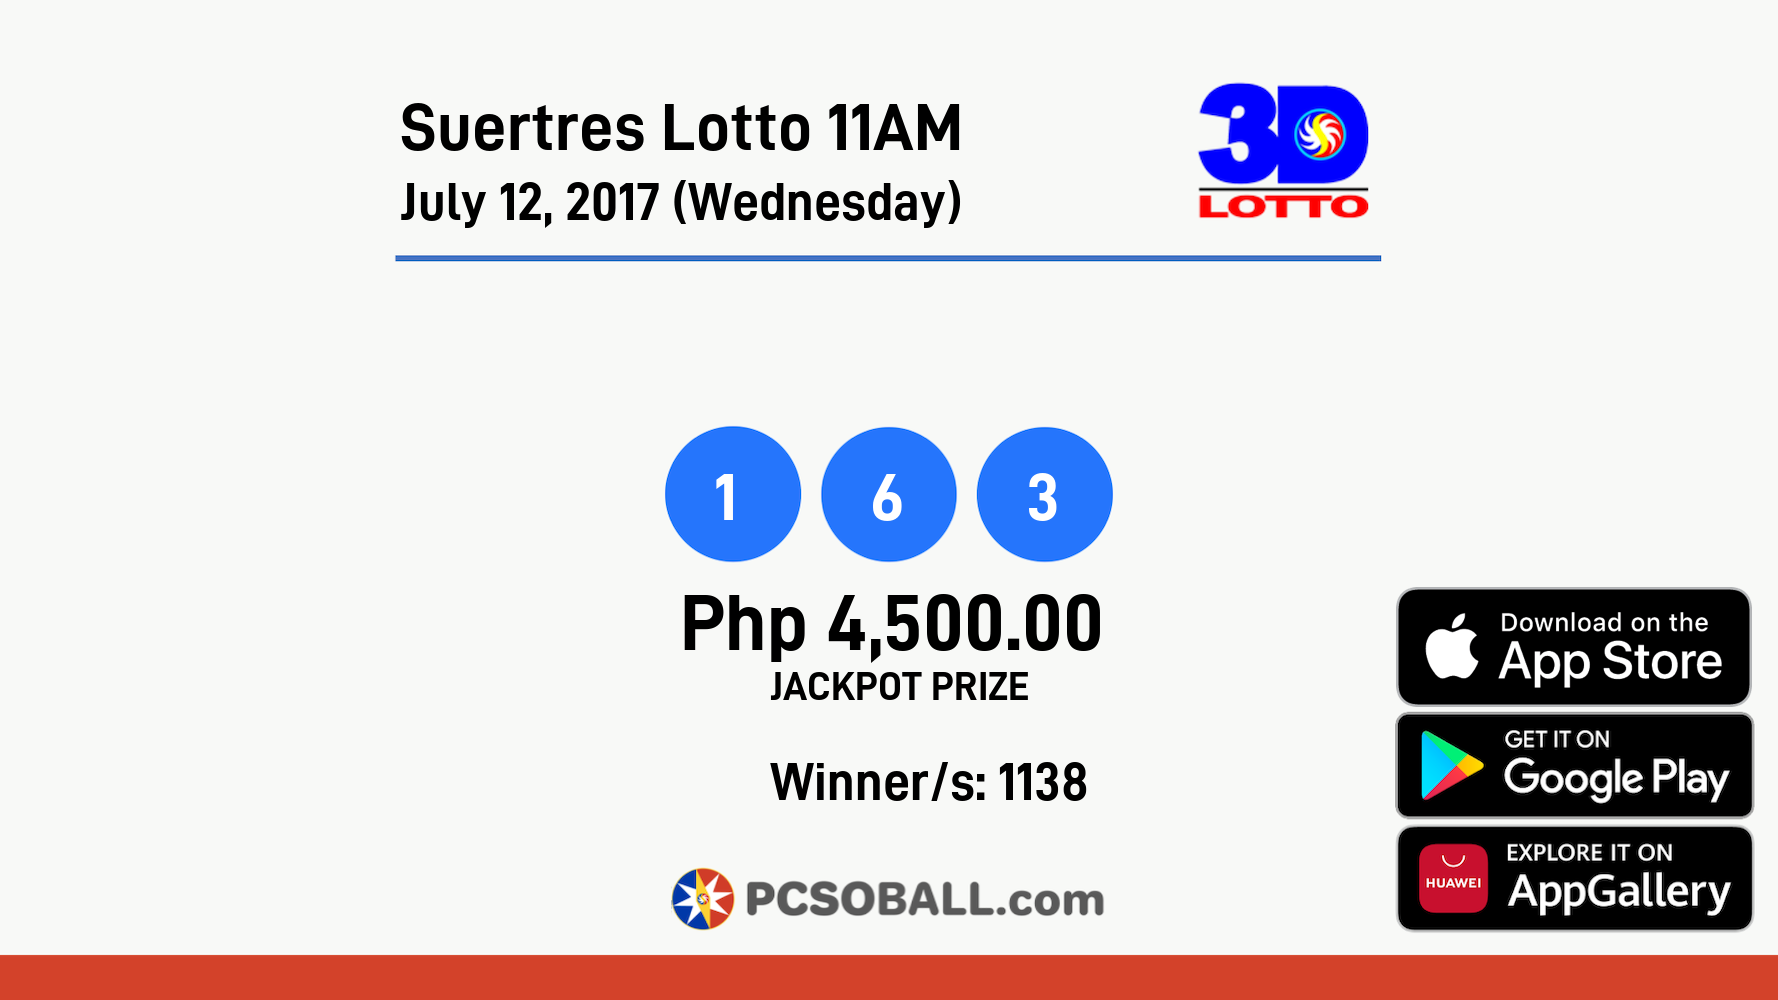 Suertres Lotto 11AM July 12, 2017 (Wednesday) Result